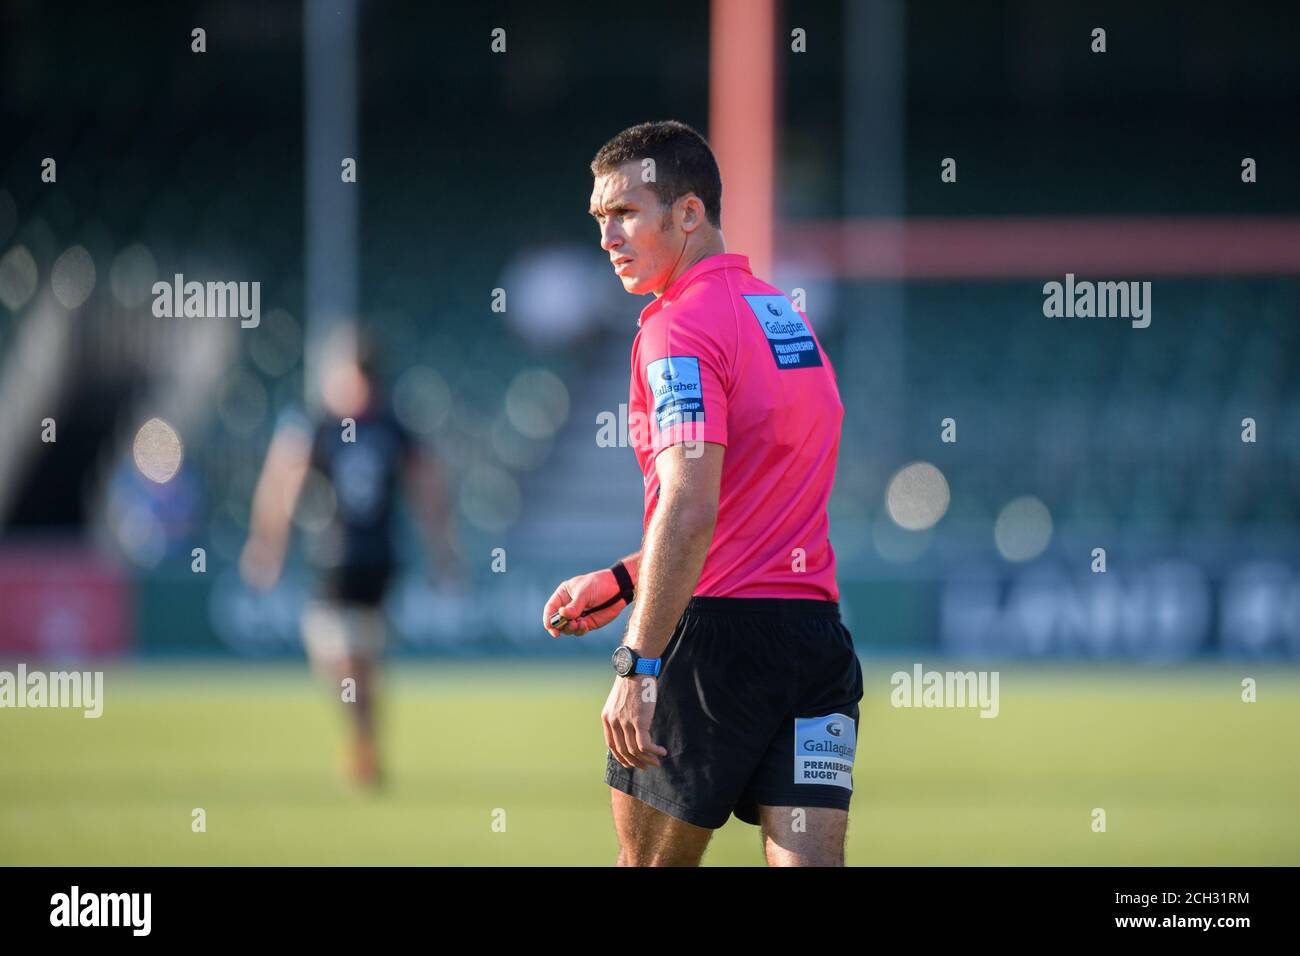 LONDON, UNITED KINGDOM. 13th, Sep 2020. Referee: Adam Leal (5th Premiership game) looks on during Gallagher Premiership Rugby Match Round 20 between Saracens vs Exeter Chiefs at Allianz Park on Sunday, 13 September 2020. LONDON ENGLAND.  Credit: Taka G Wu/Alamy Live News Stock Photo